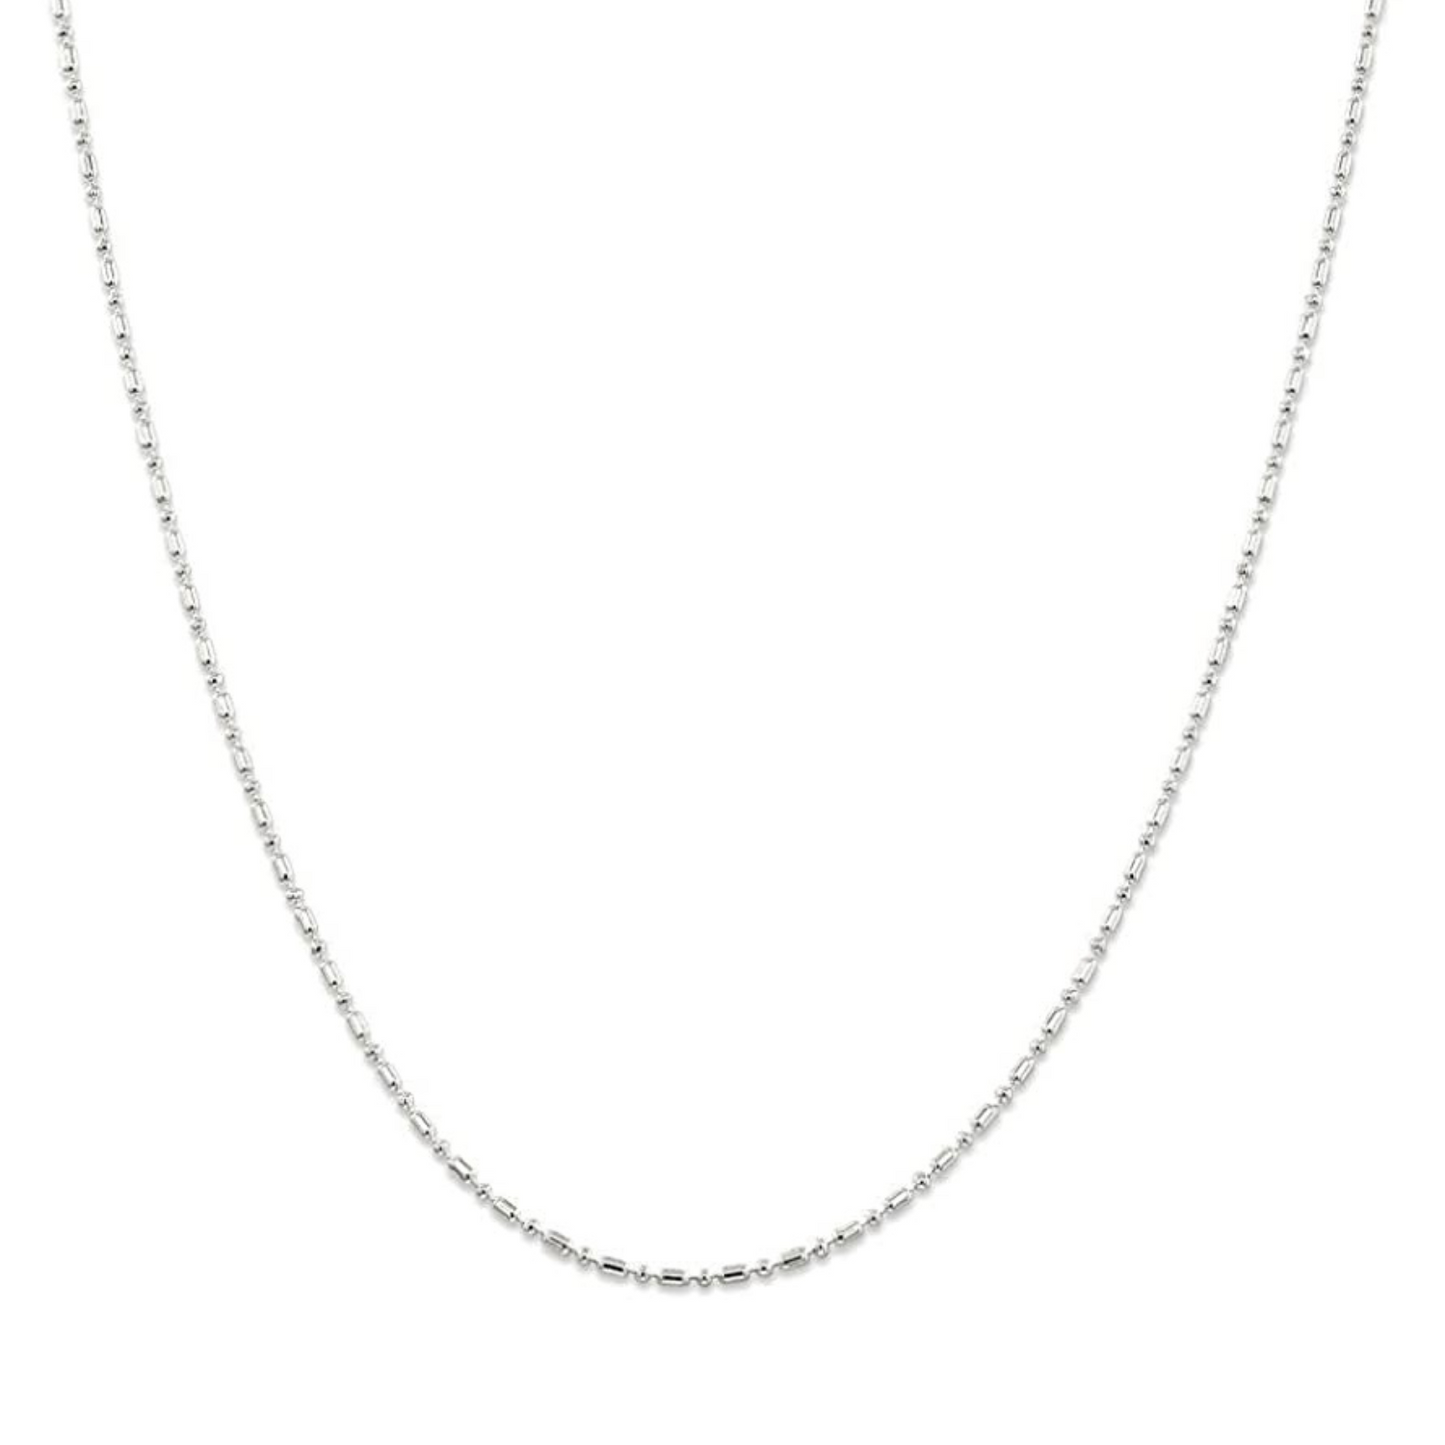 92.5 Sterling Silver, Ball-Bead Chain 16 inches + 2 inch extension